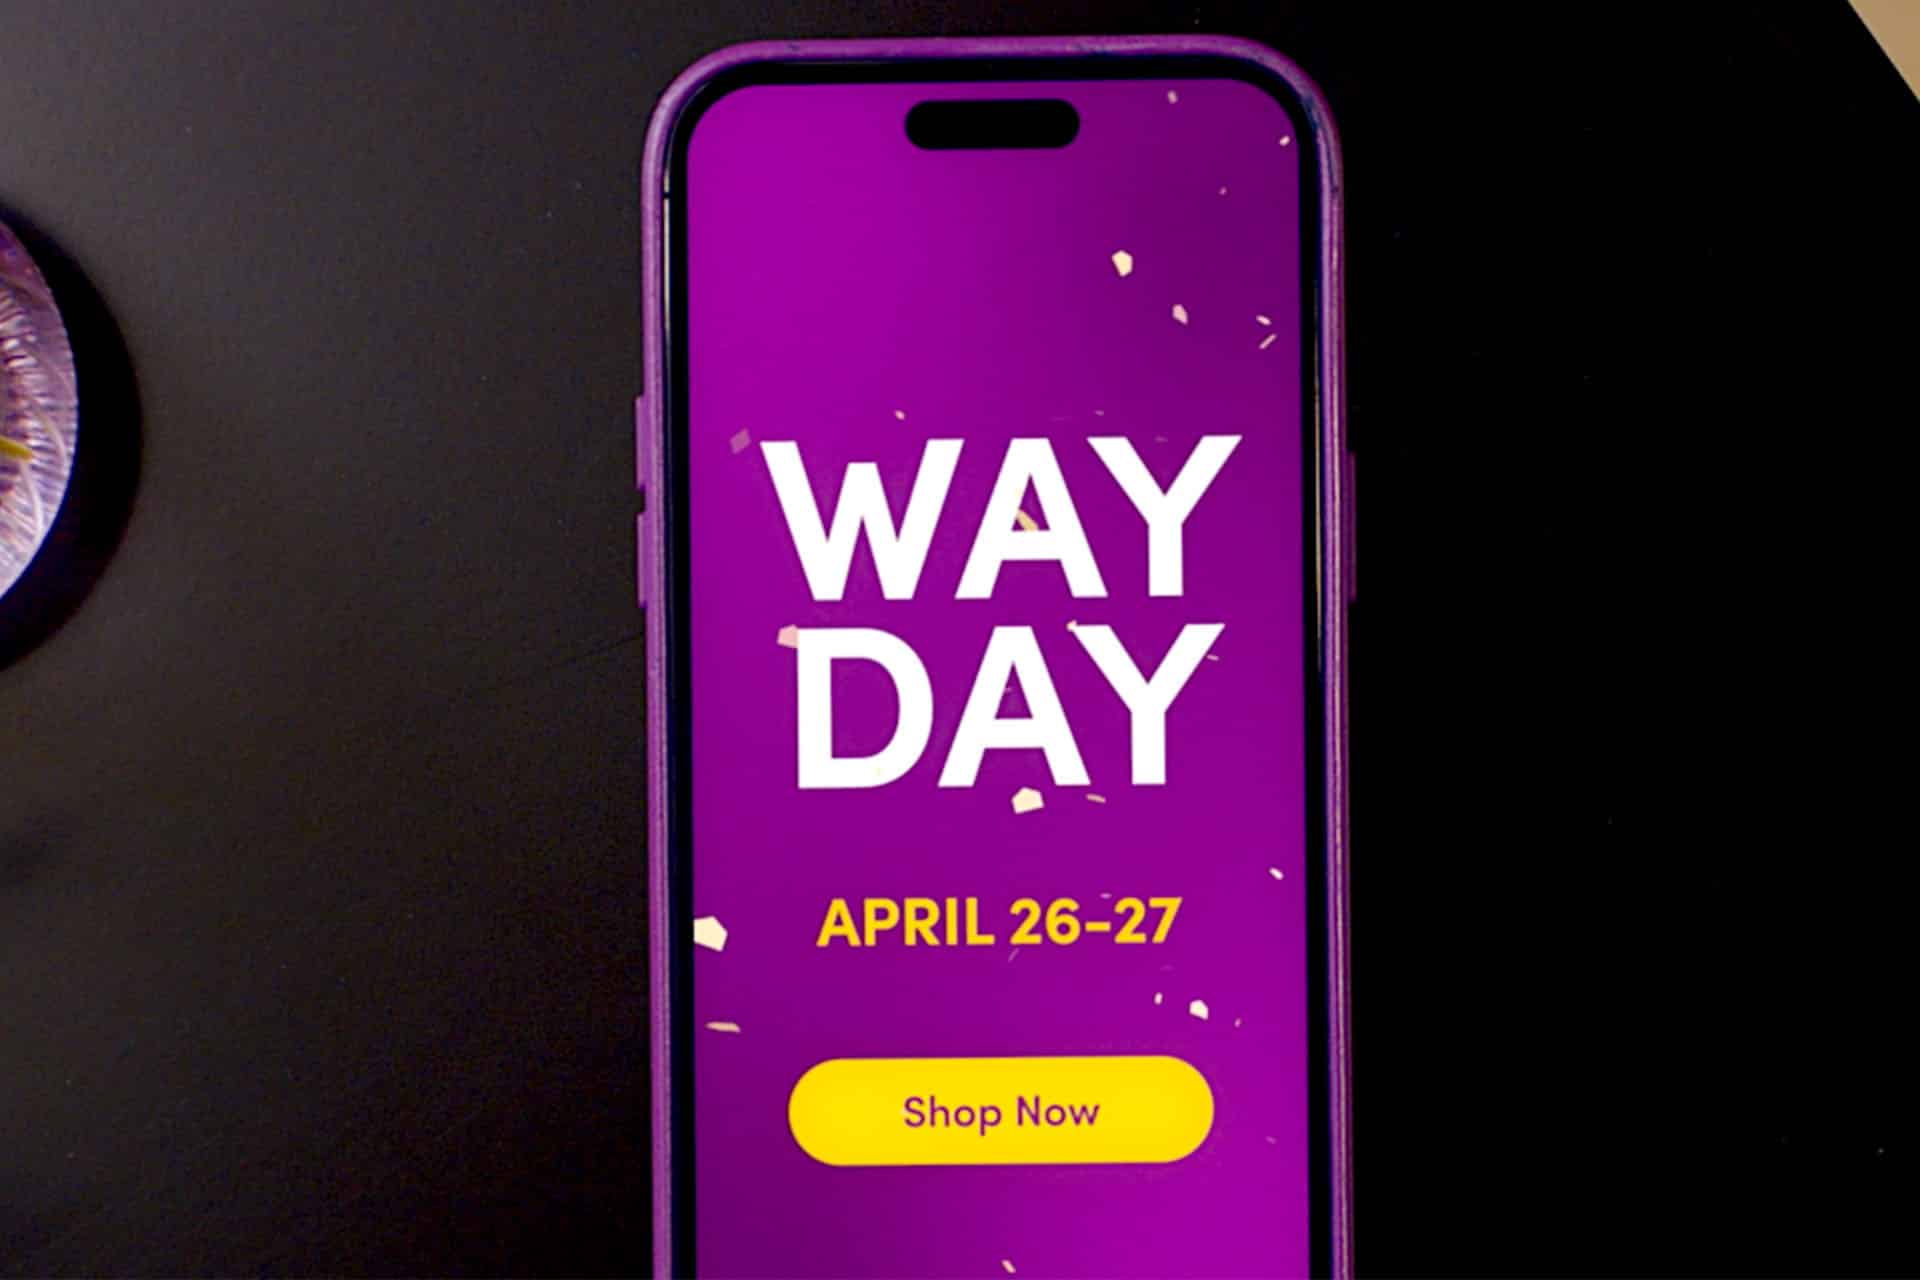 Wayfair Readying Way Day Deals on Its Websites, Via Livestream